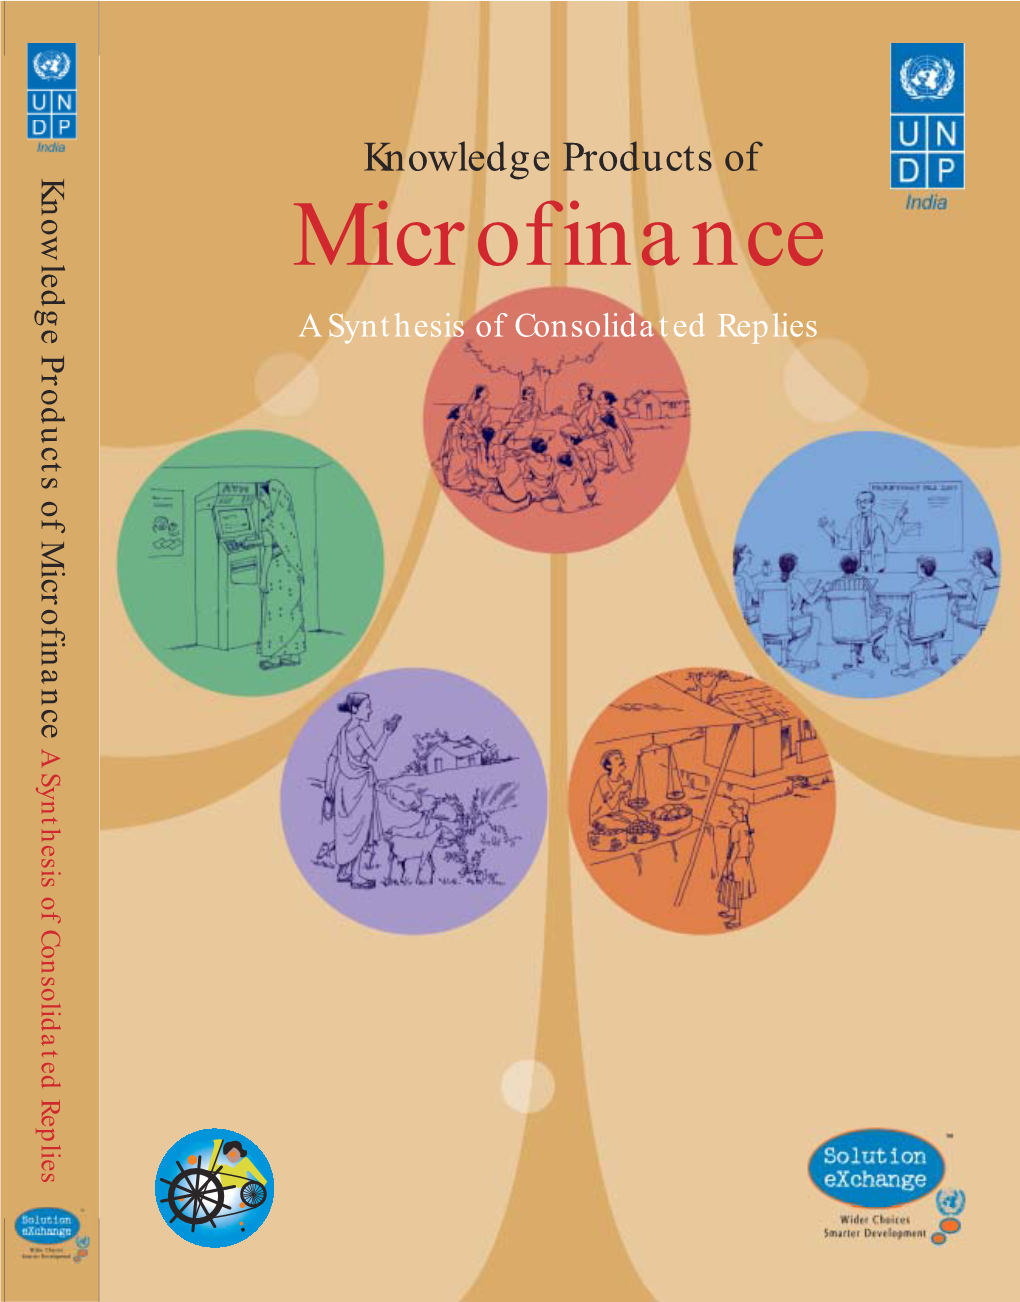 Knowledge Products of Microfinance – a Synthesis of Consolidated Replies